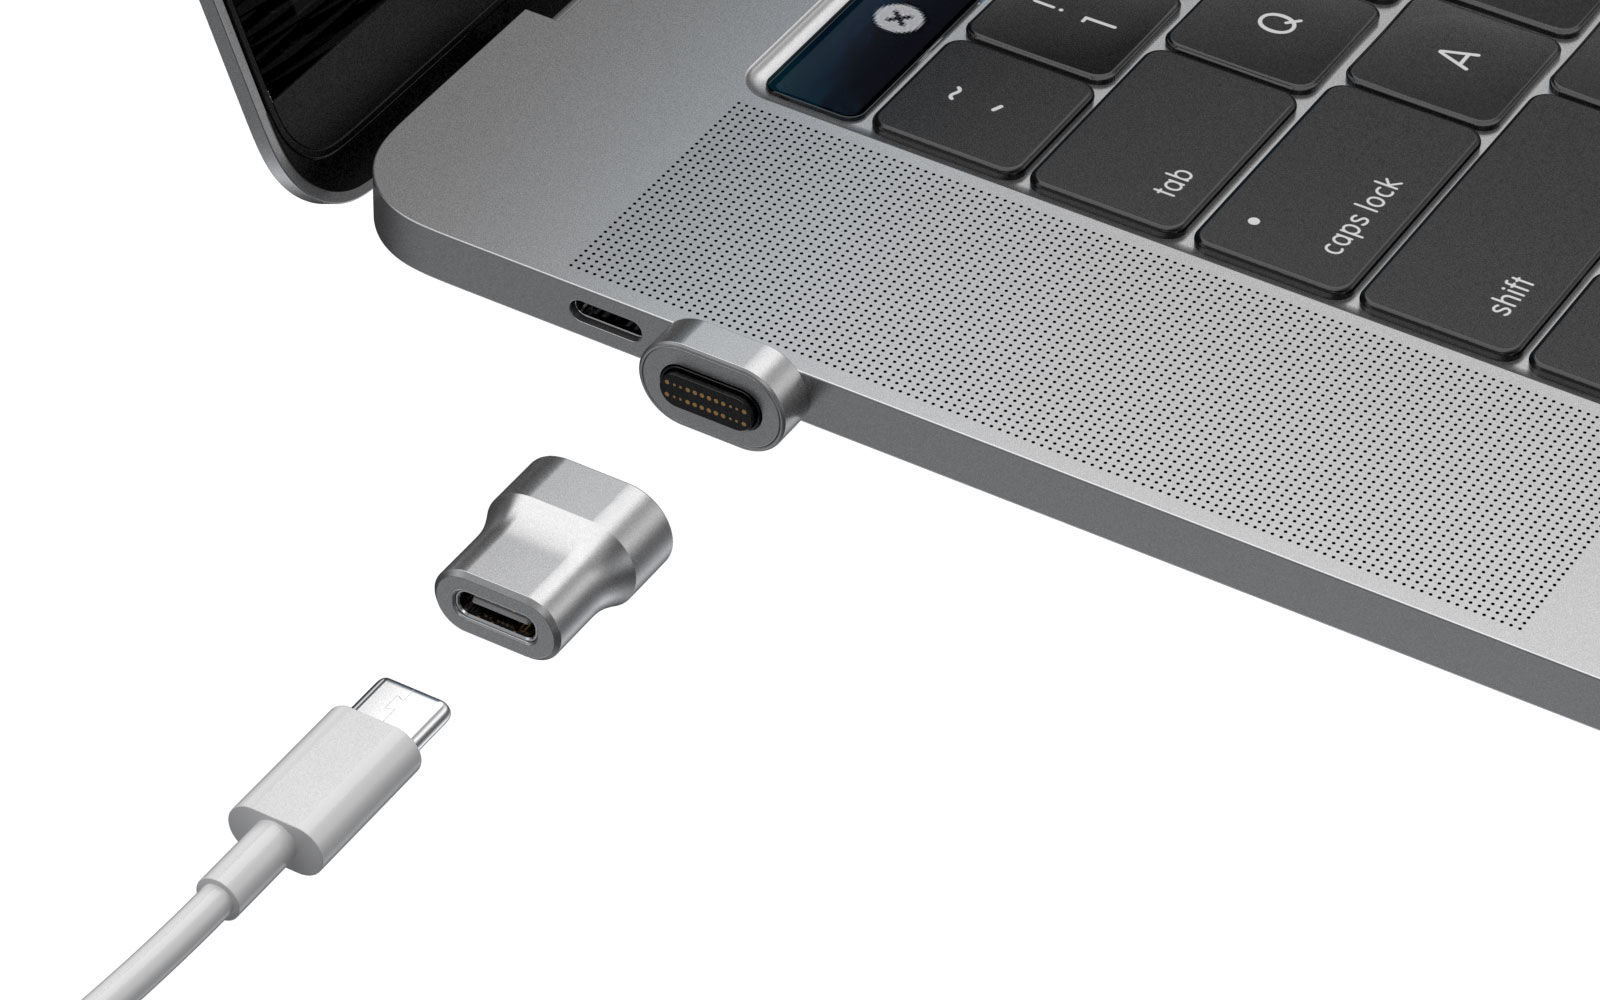 ThunderMag Brings MagSafe Back to Mac with Thunderbolt 3 Speed